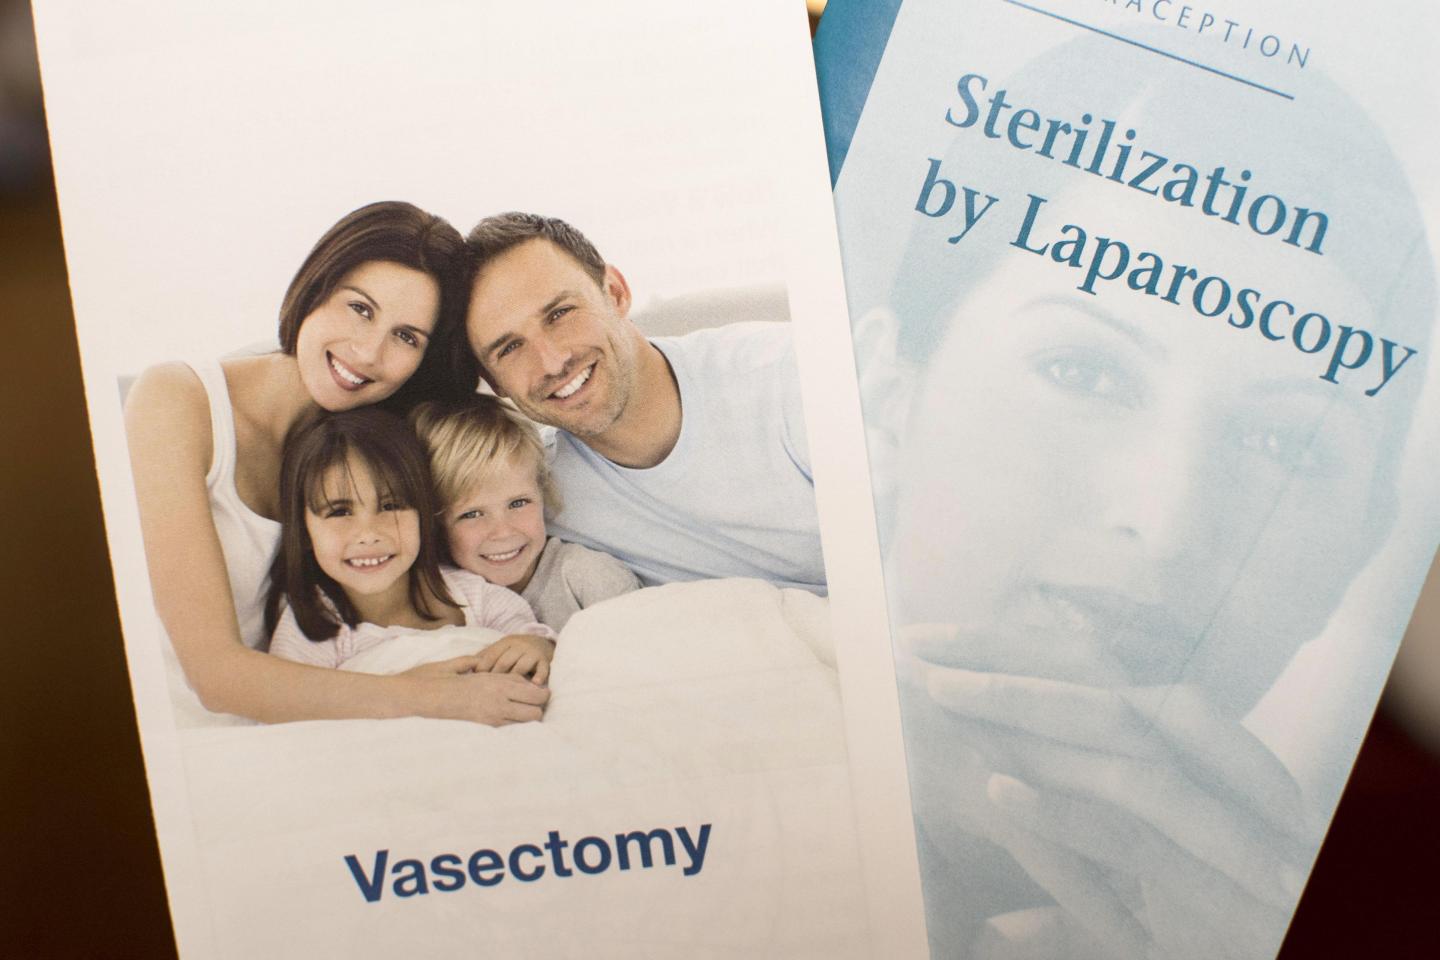 Pamphlets on Vasectomies and Tubal Ligation